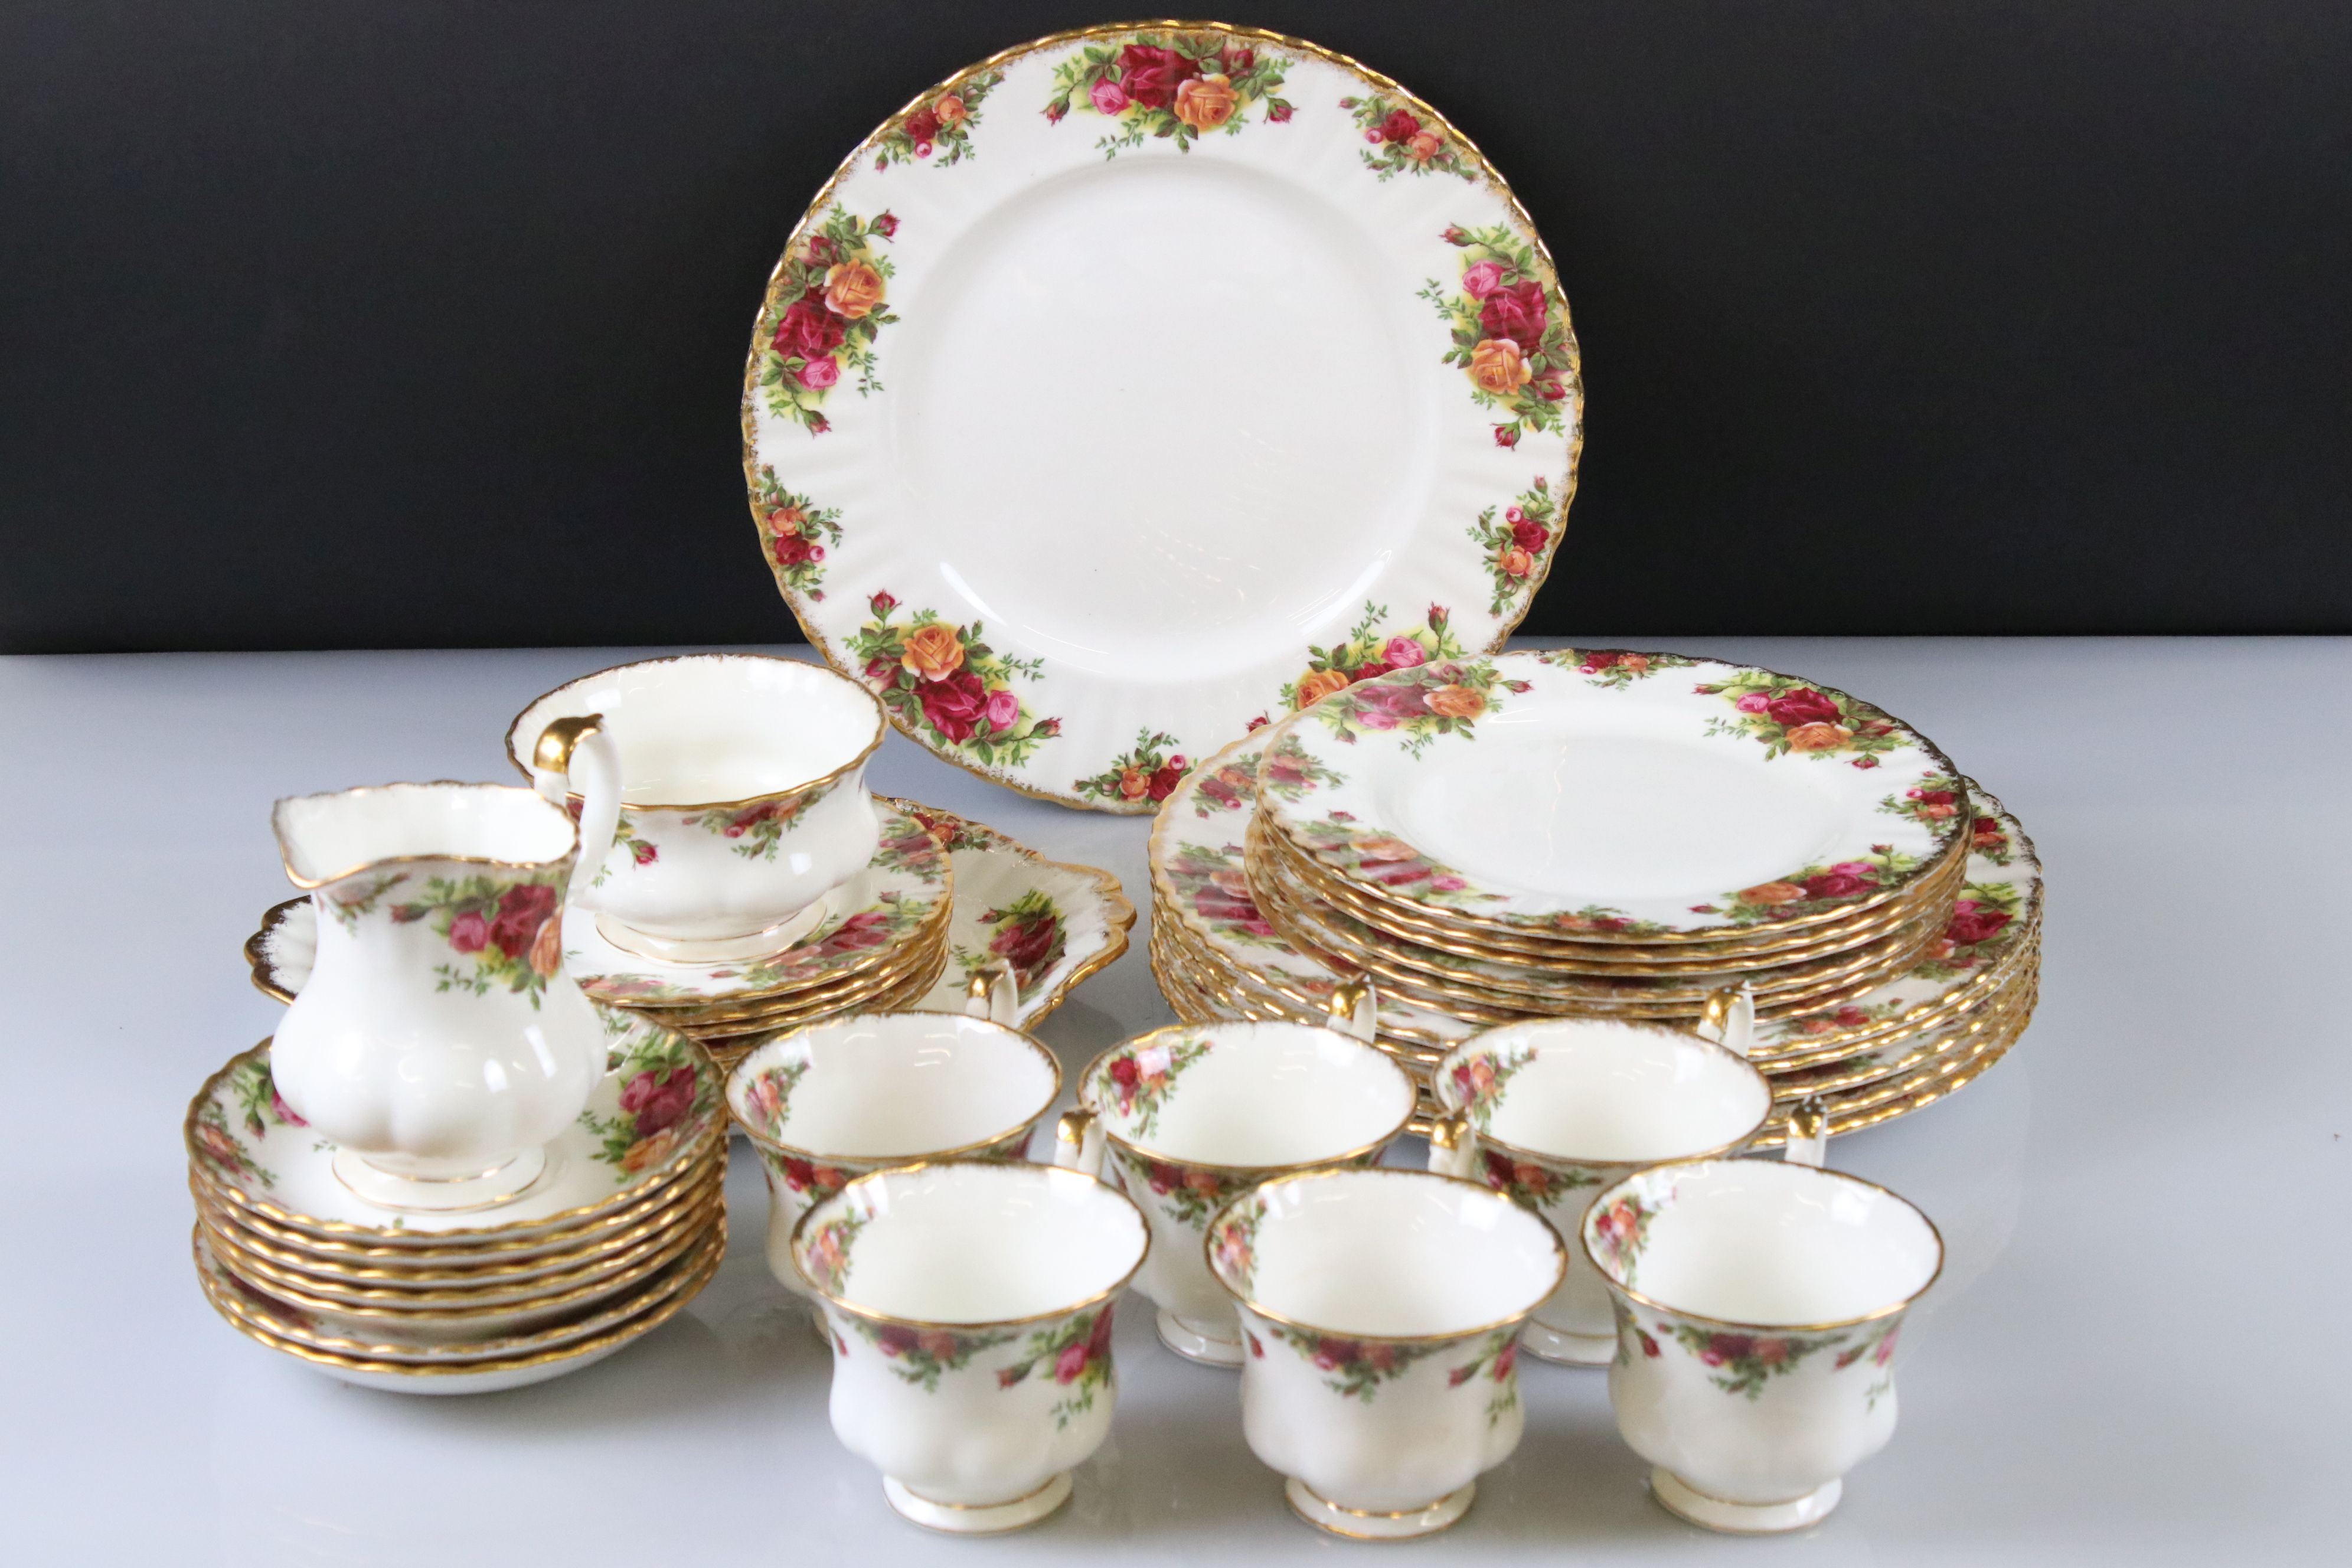 Royal Albert ' Old Country Roses ' Tea and Dinner ware including 6 dinner plates, 6 x 8" plates, 6